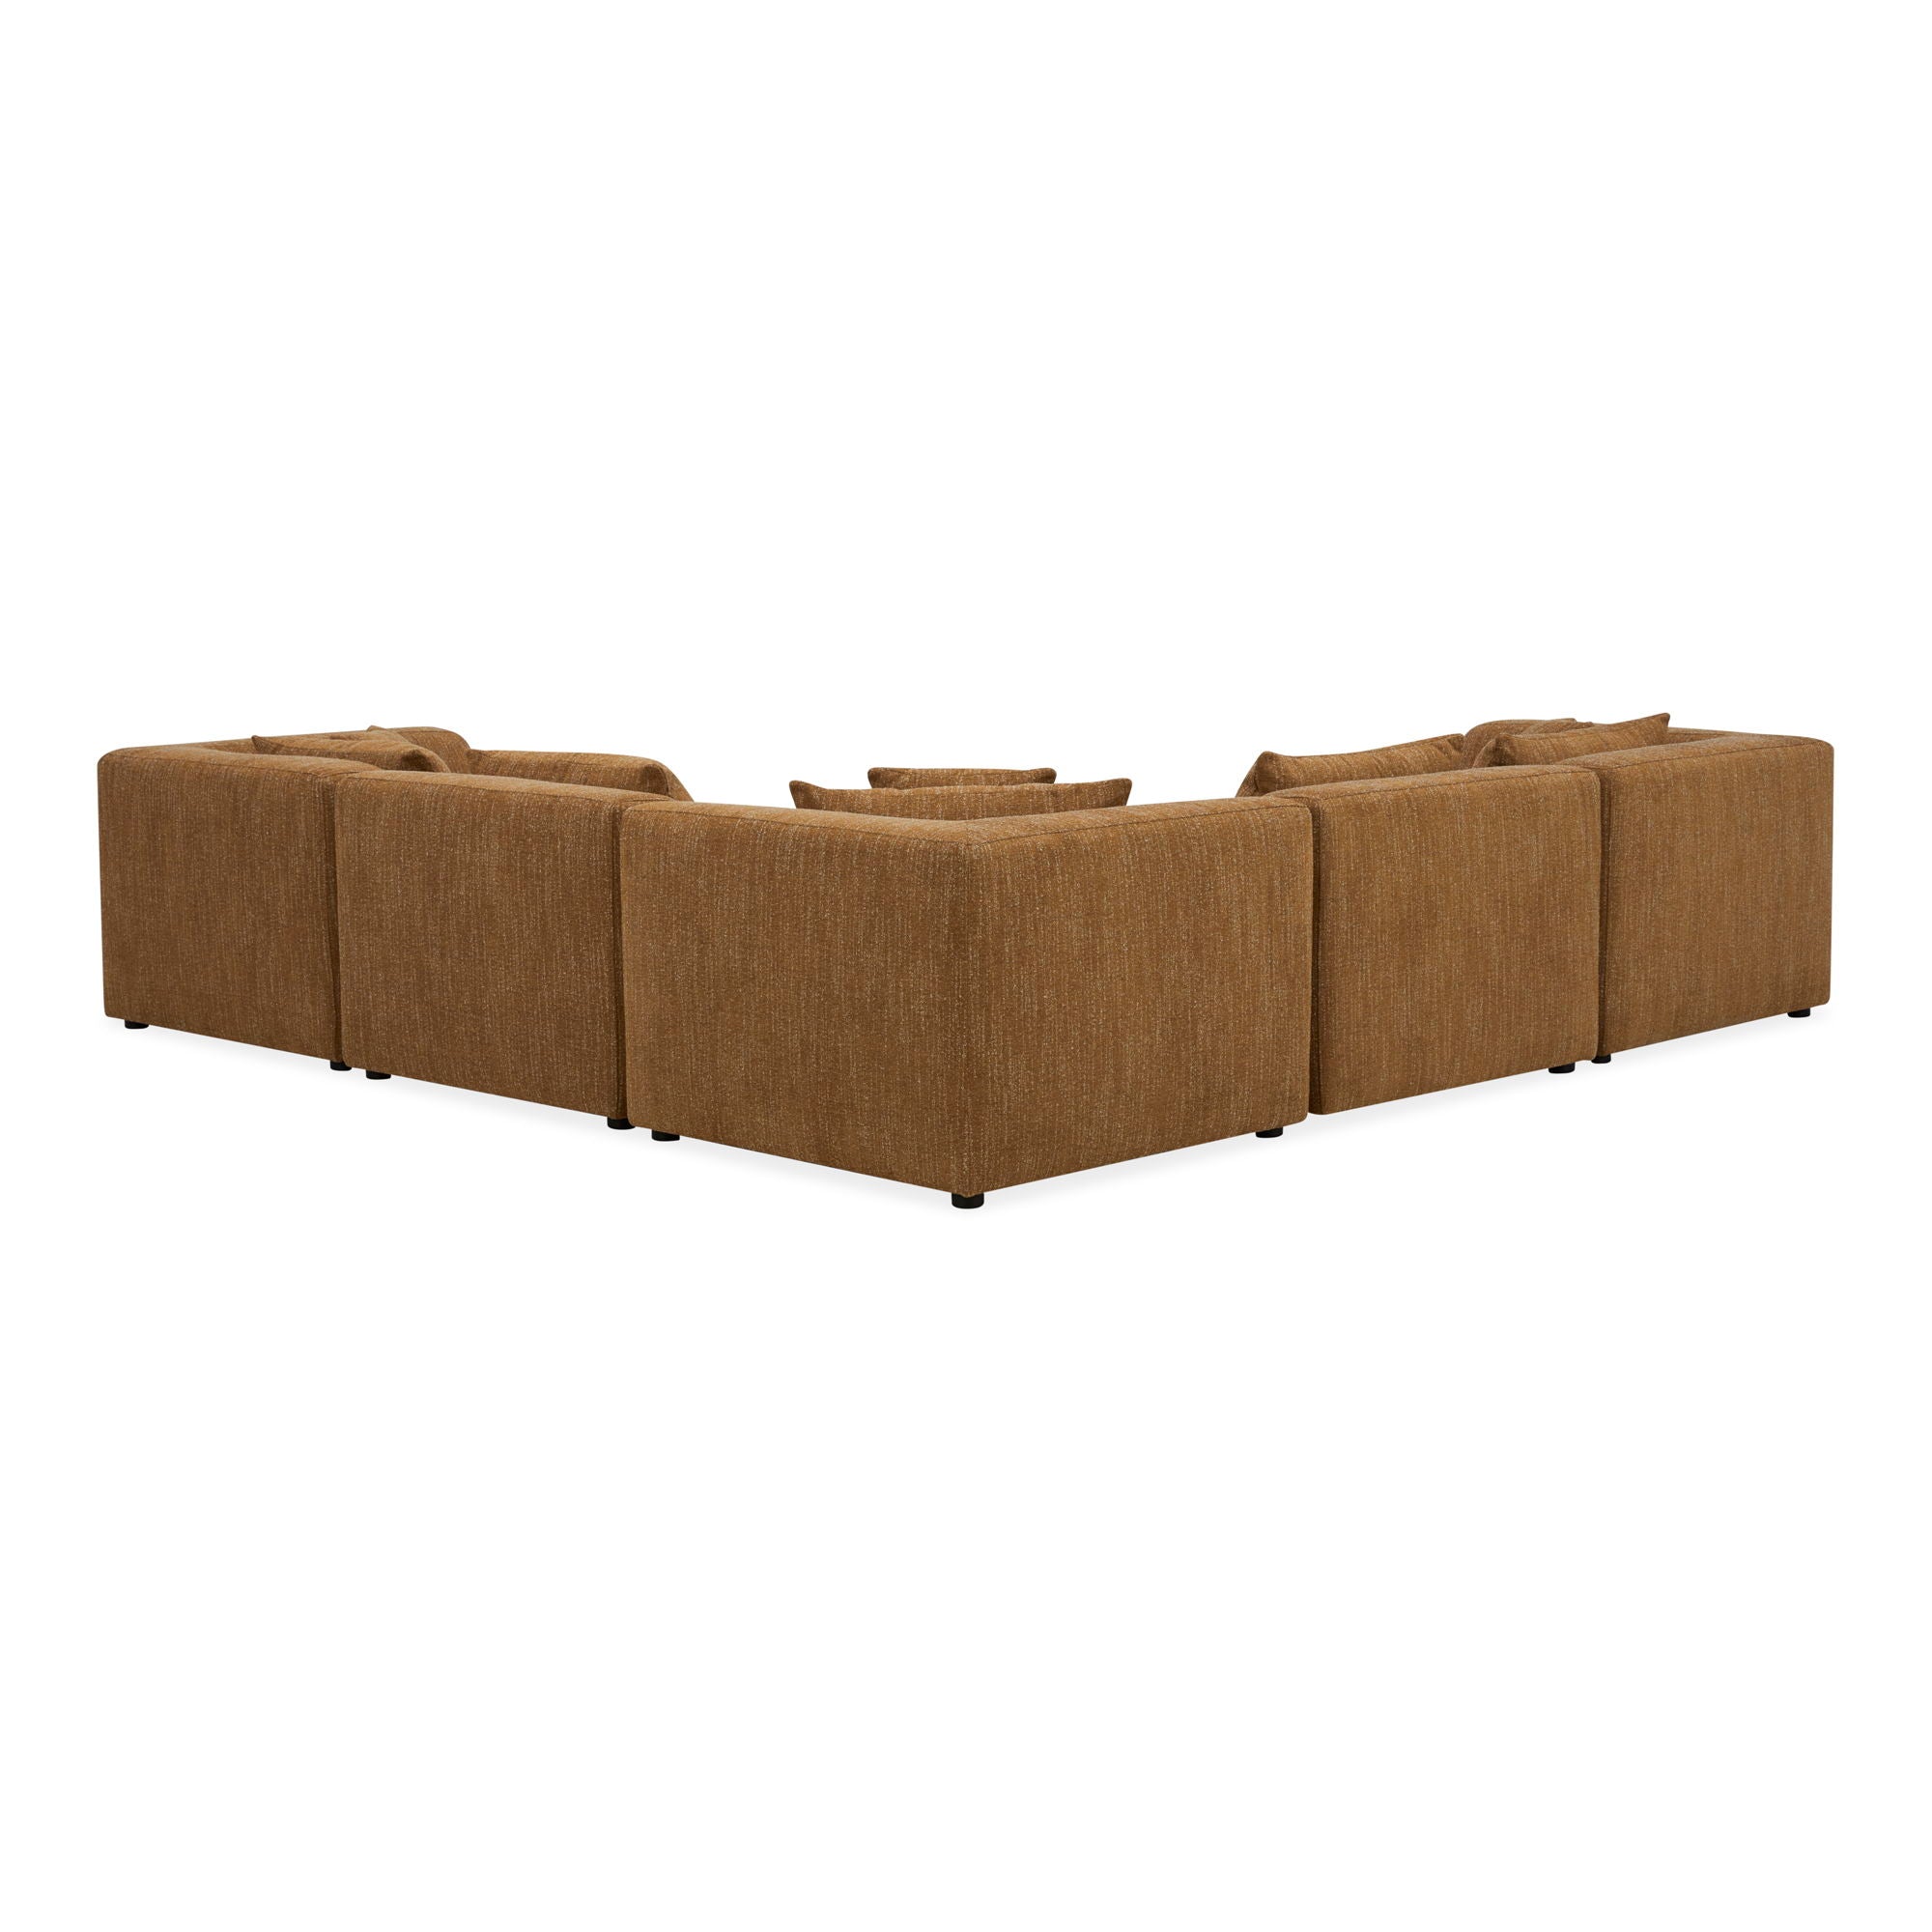 Lowtide - Classic L Modular Sectional - Amber Glow-Stationary Sectionals-American Furniture Outlet